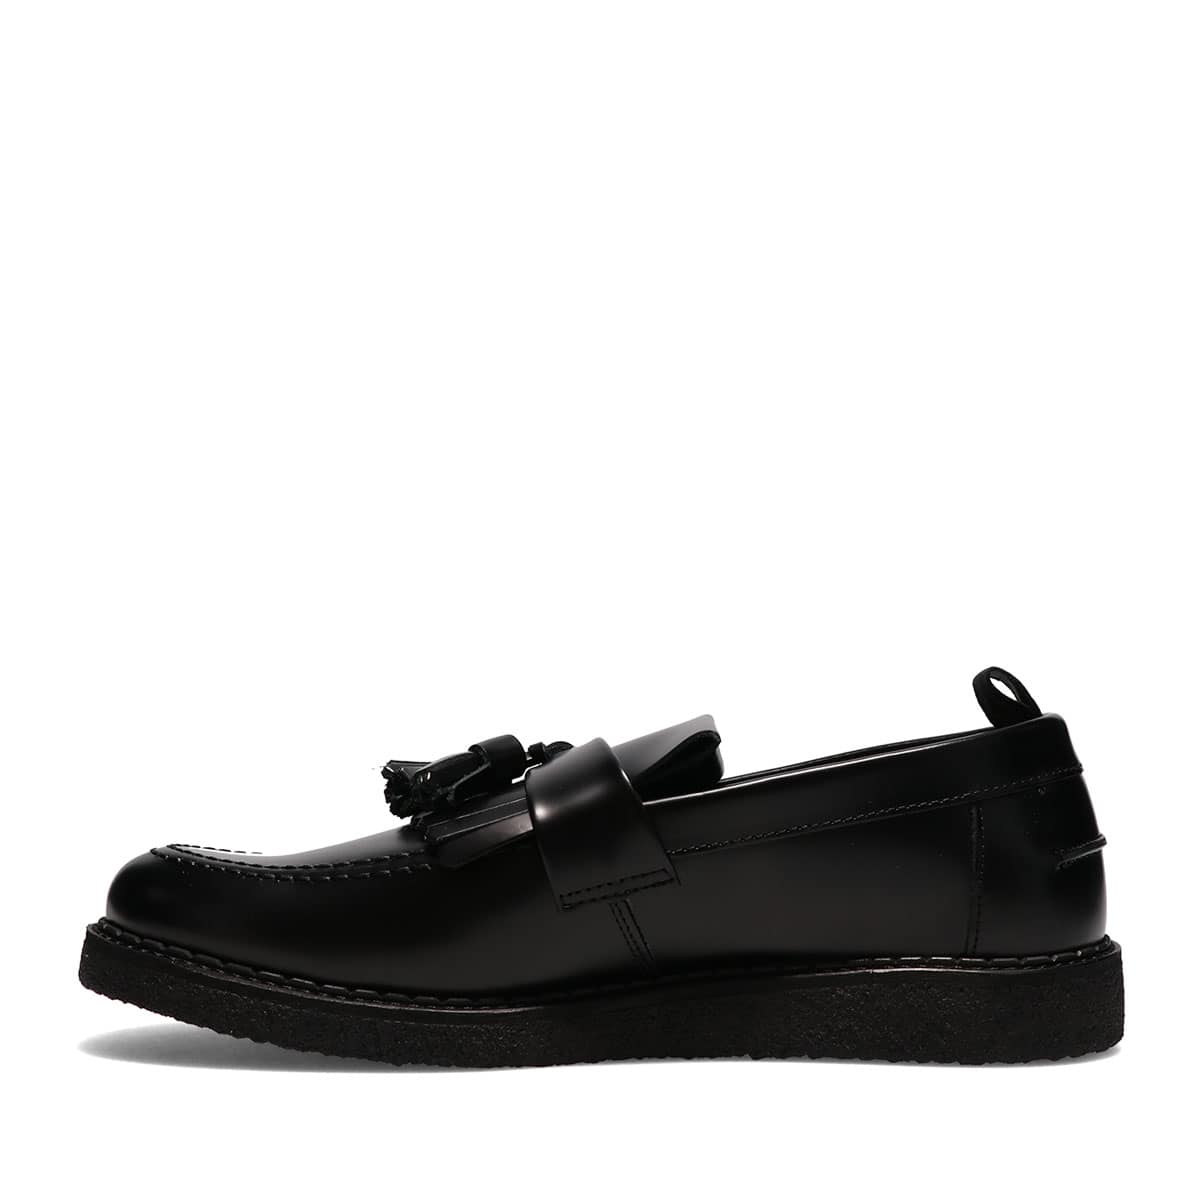 FRED PERRY×GEORGE COX TASSEL LOAFER